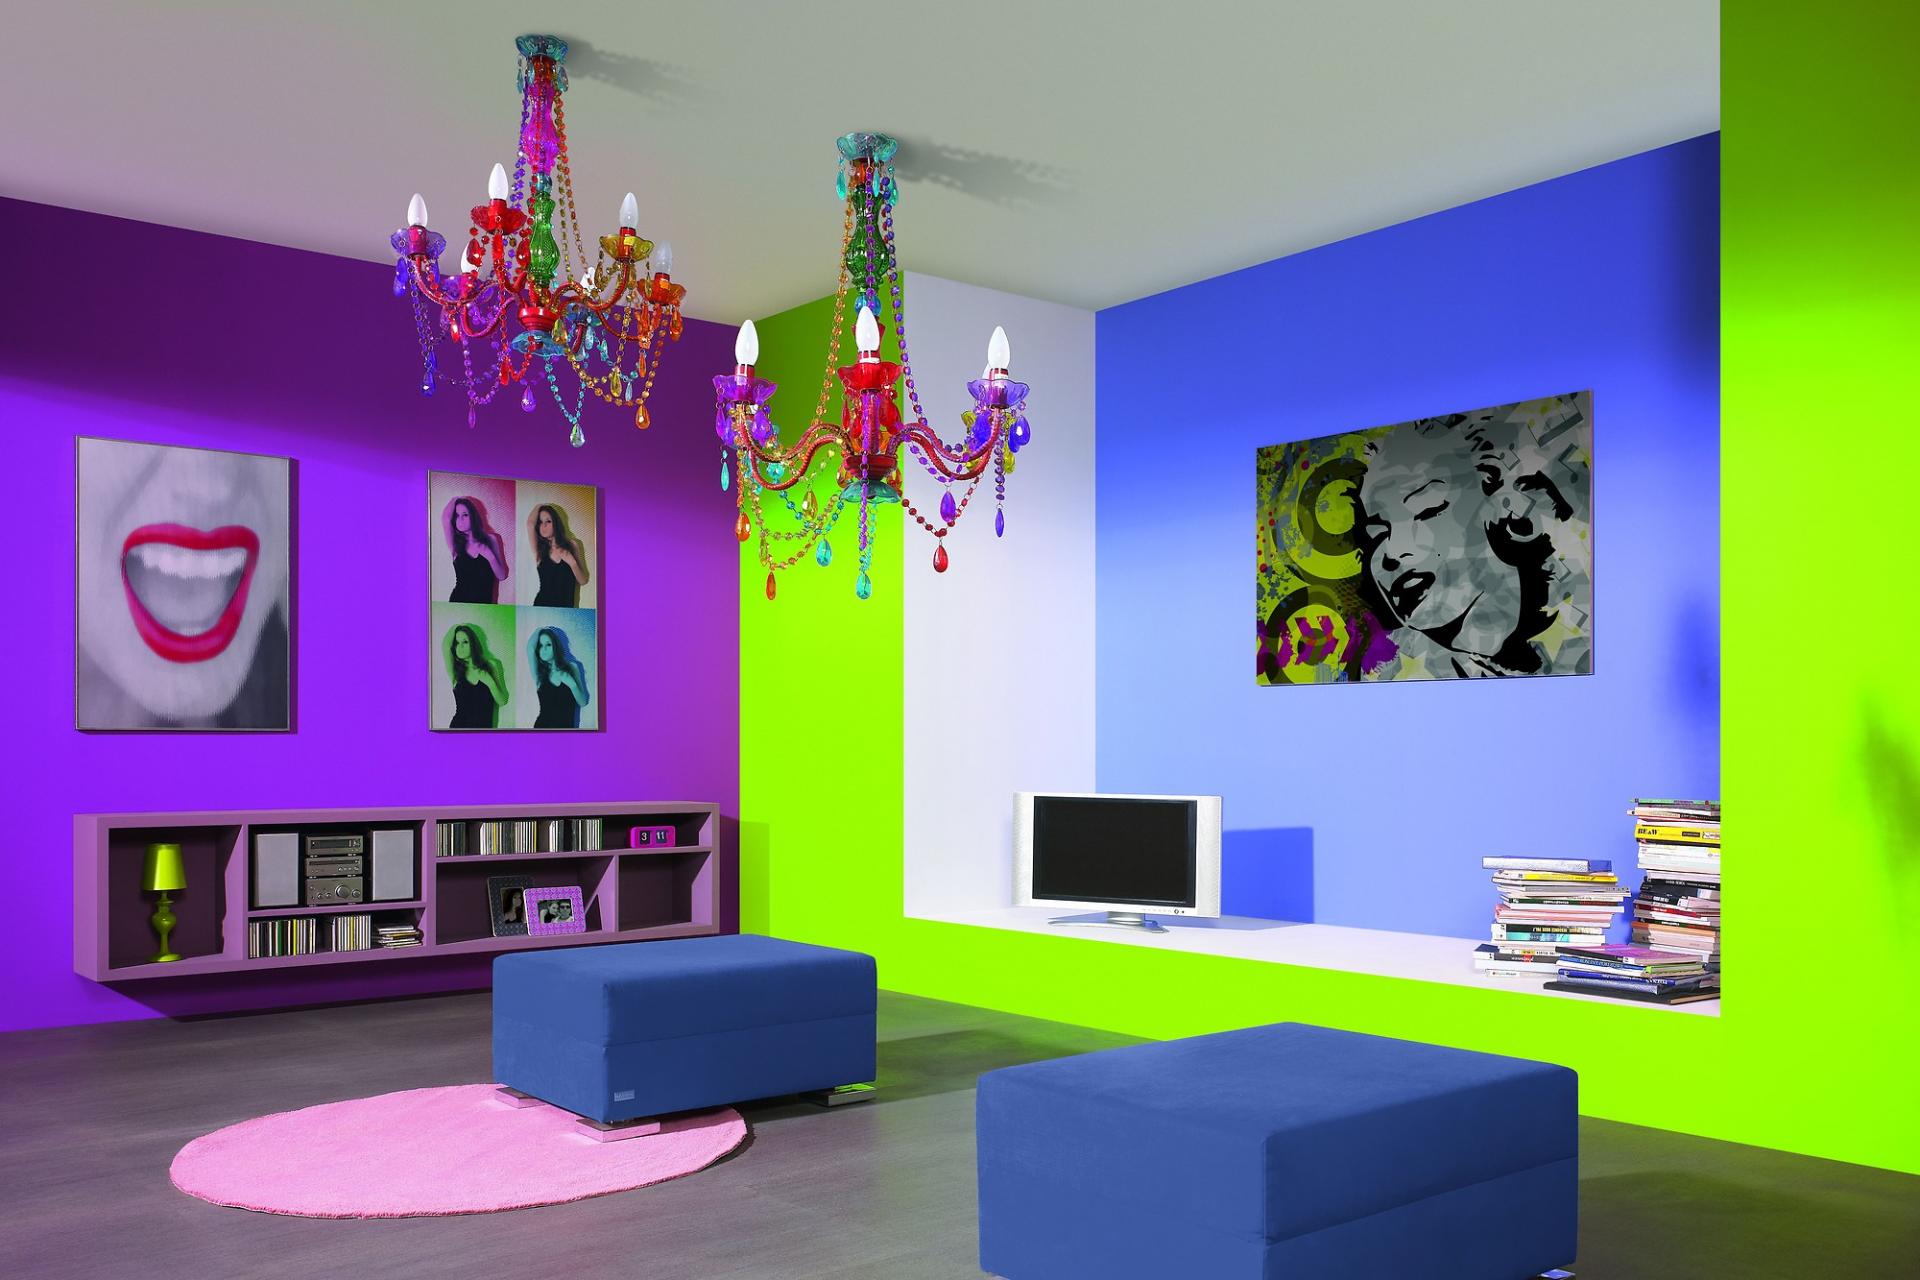 An example of a bright apartment decor in the style of pop art